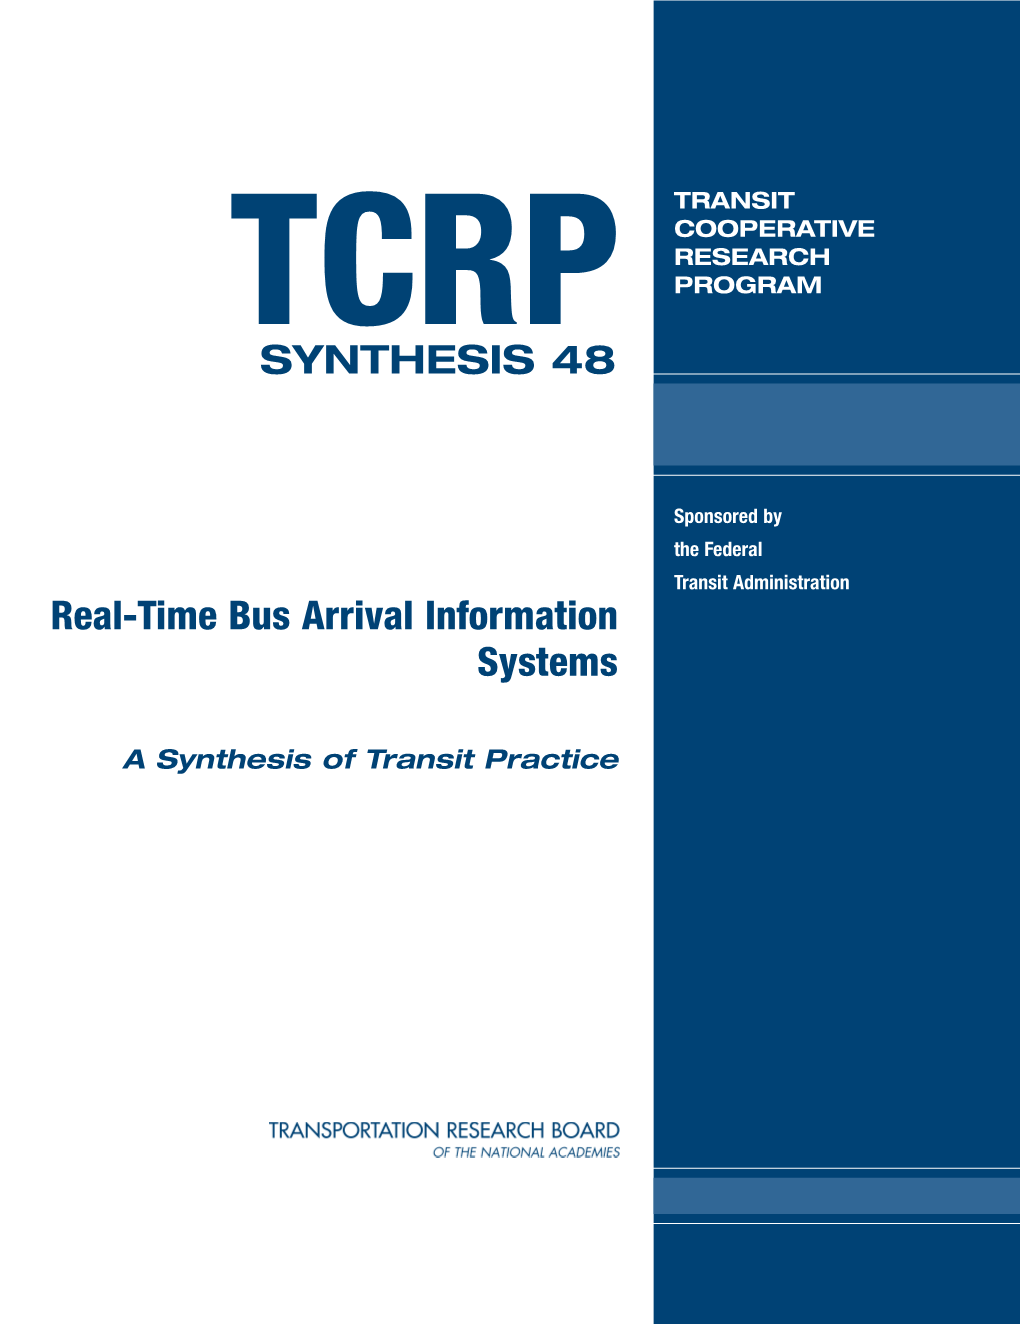 TCRP Synthesis 48: Real-Time Bus Arrival Information Systems